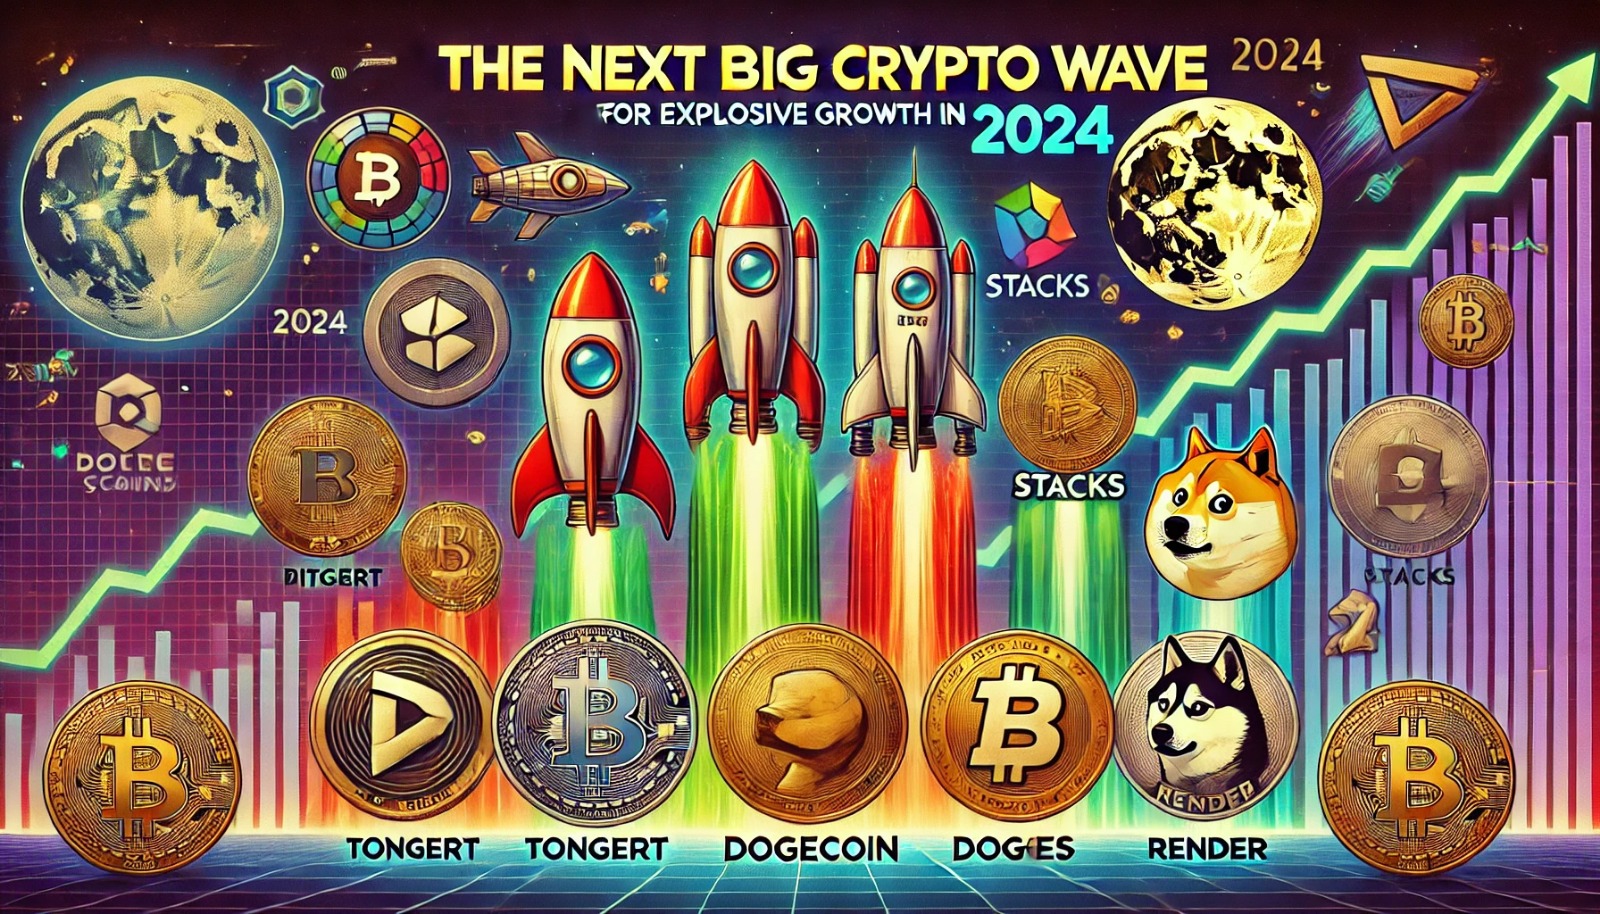 The Next Big Crypto Wave: Top Altcoins to Watch for Explosive Growth in 2024: Bitgert, Toncoin, Dogecoin, Stacks, dogwifhat, Render